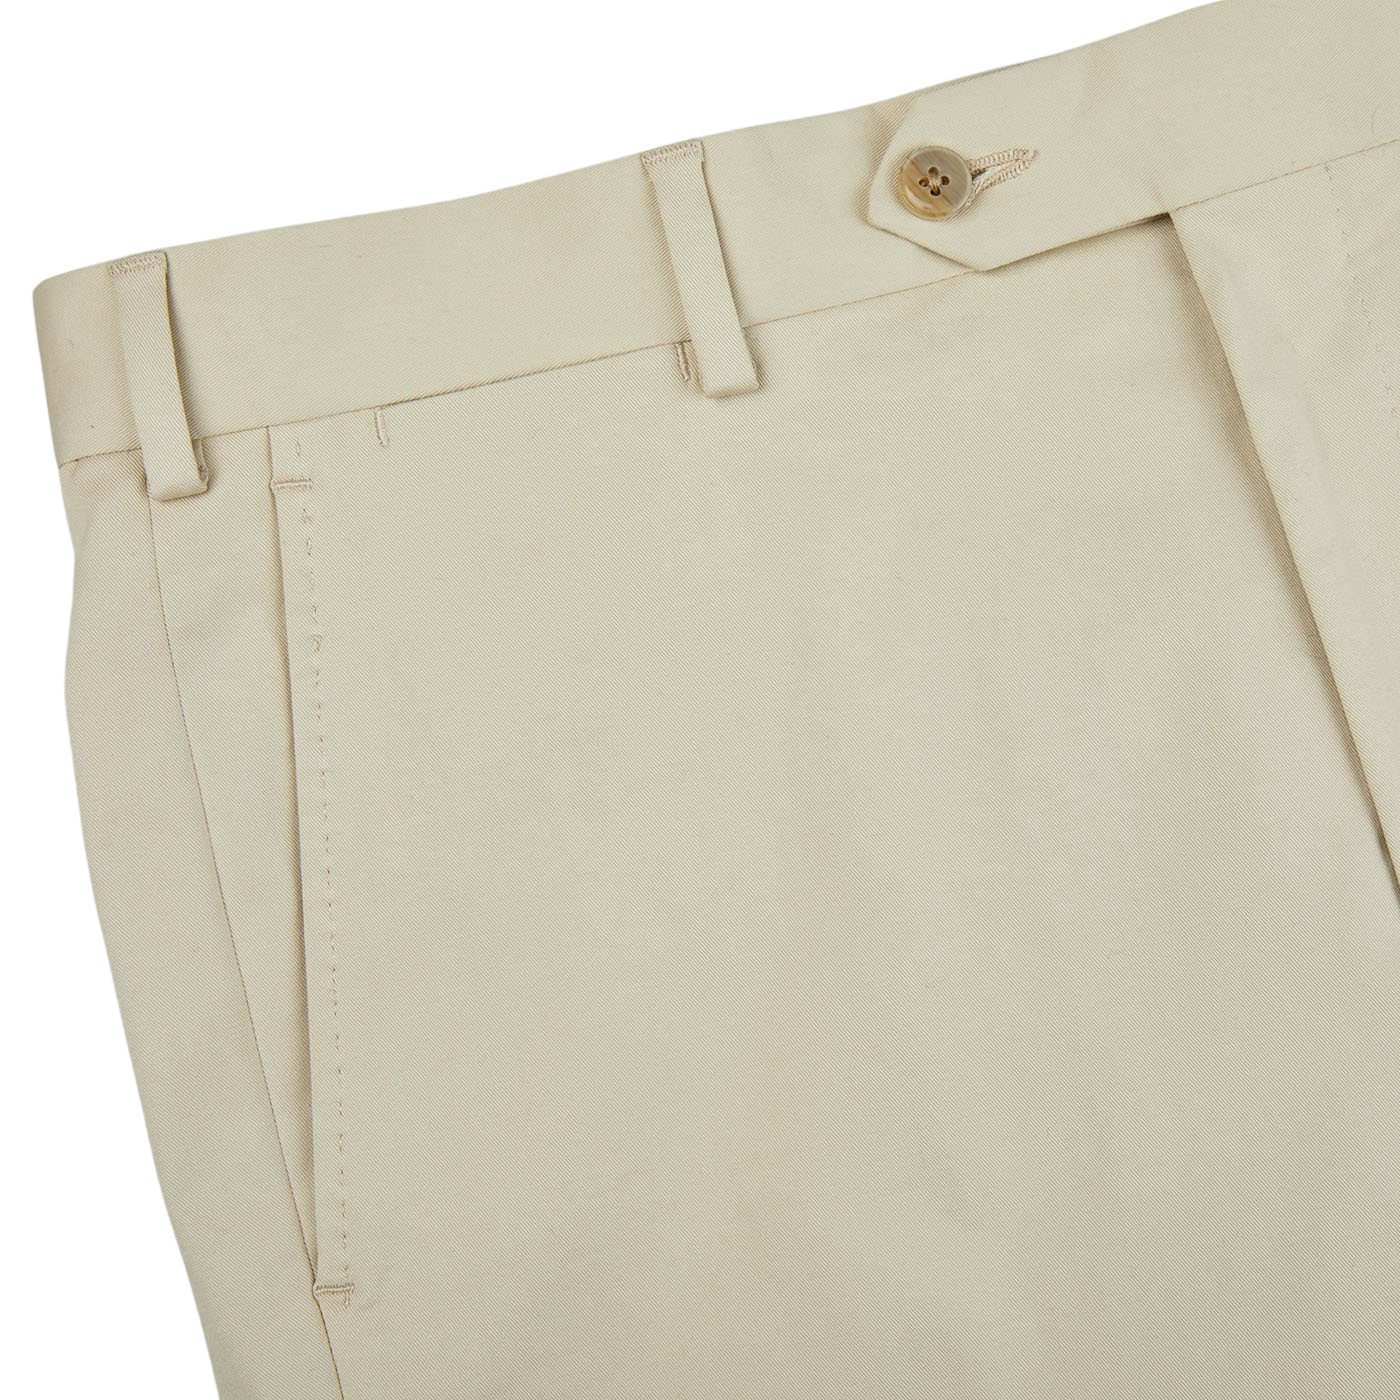 A close up of Luigi Bianchi Light Beige Cotton Twill Flat Front Trousers.